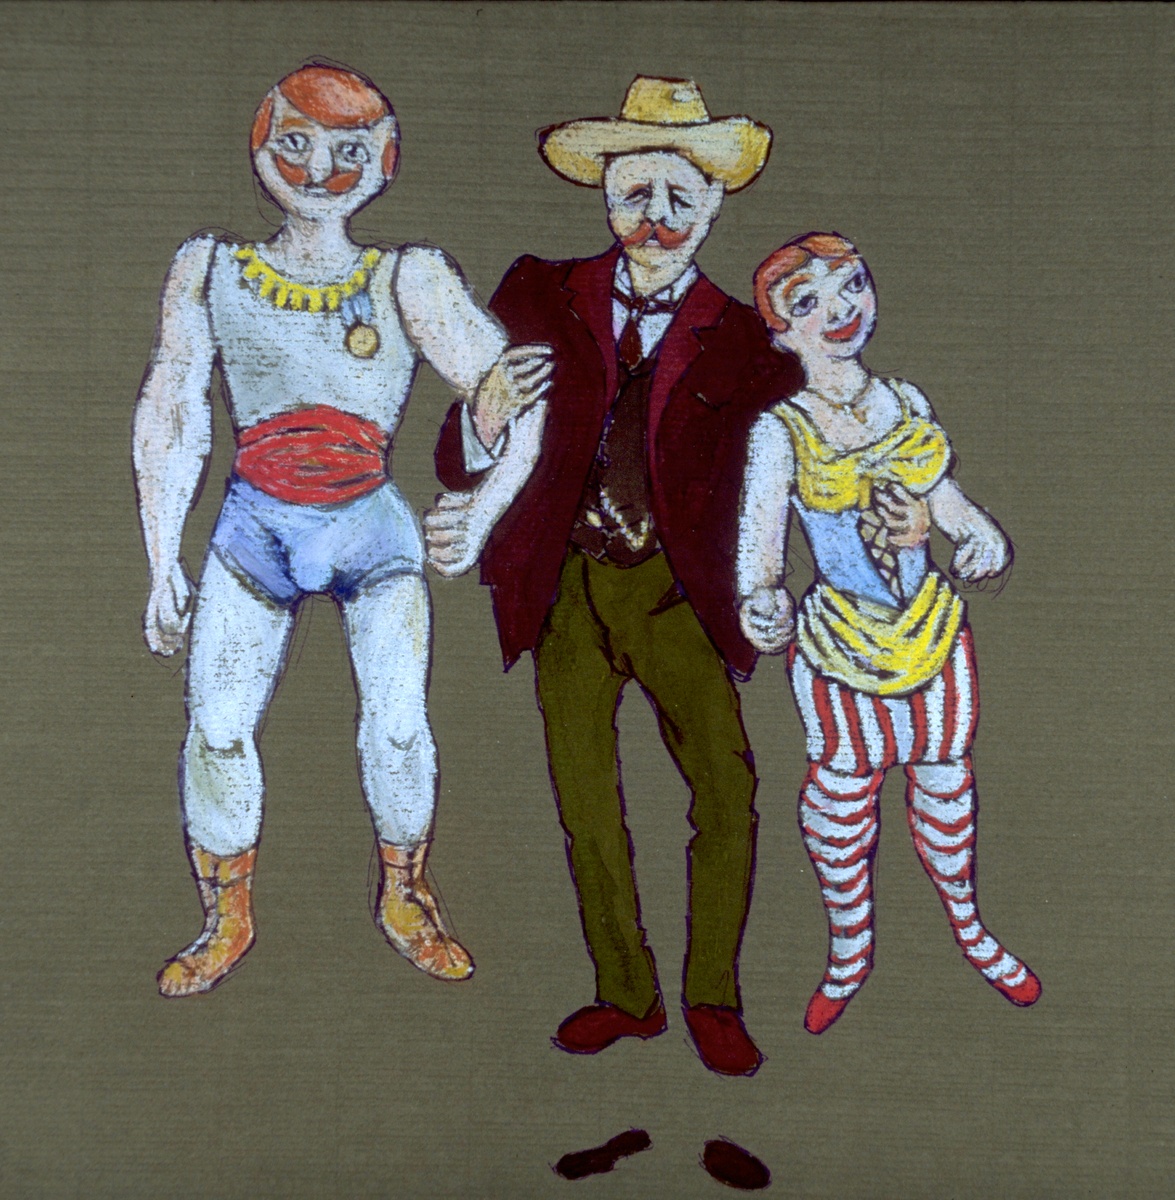 Late 1970s Carnival sideshow performers. On hand-made British paper and pastel.